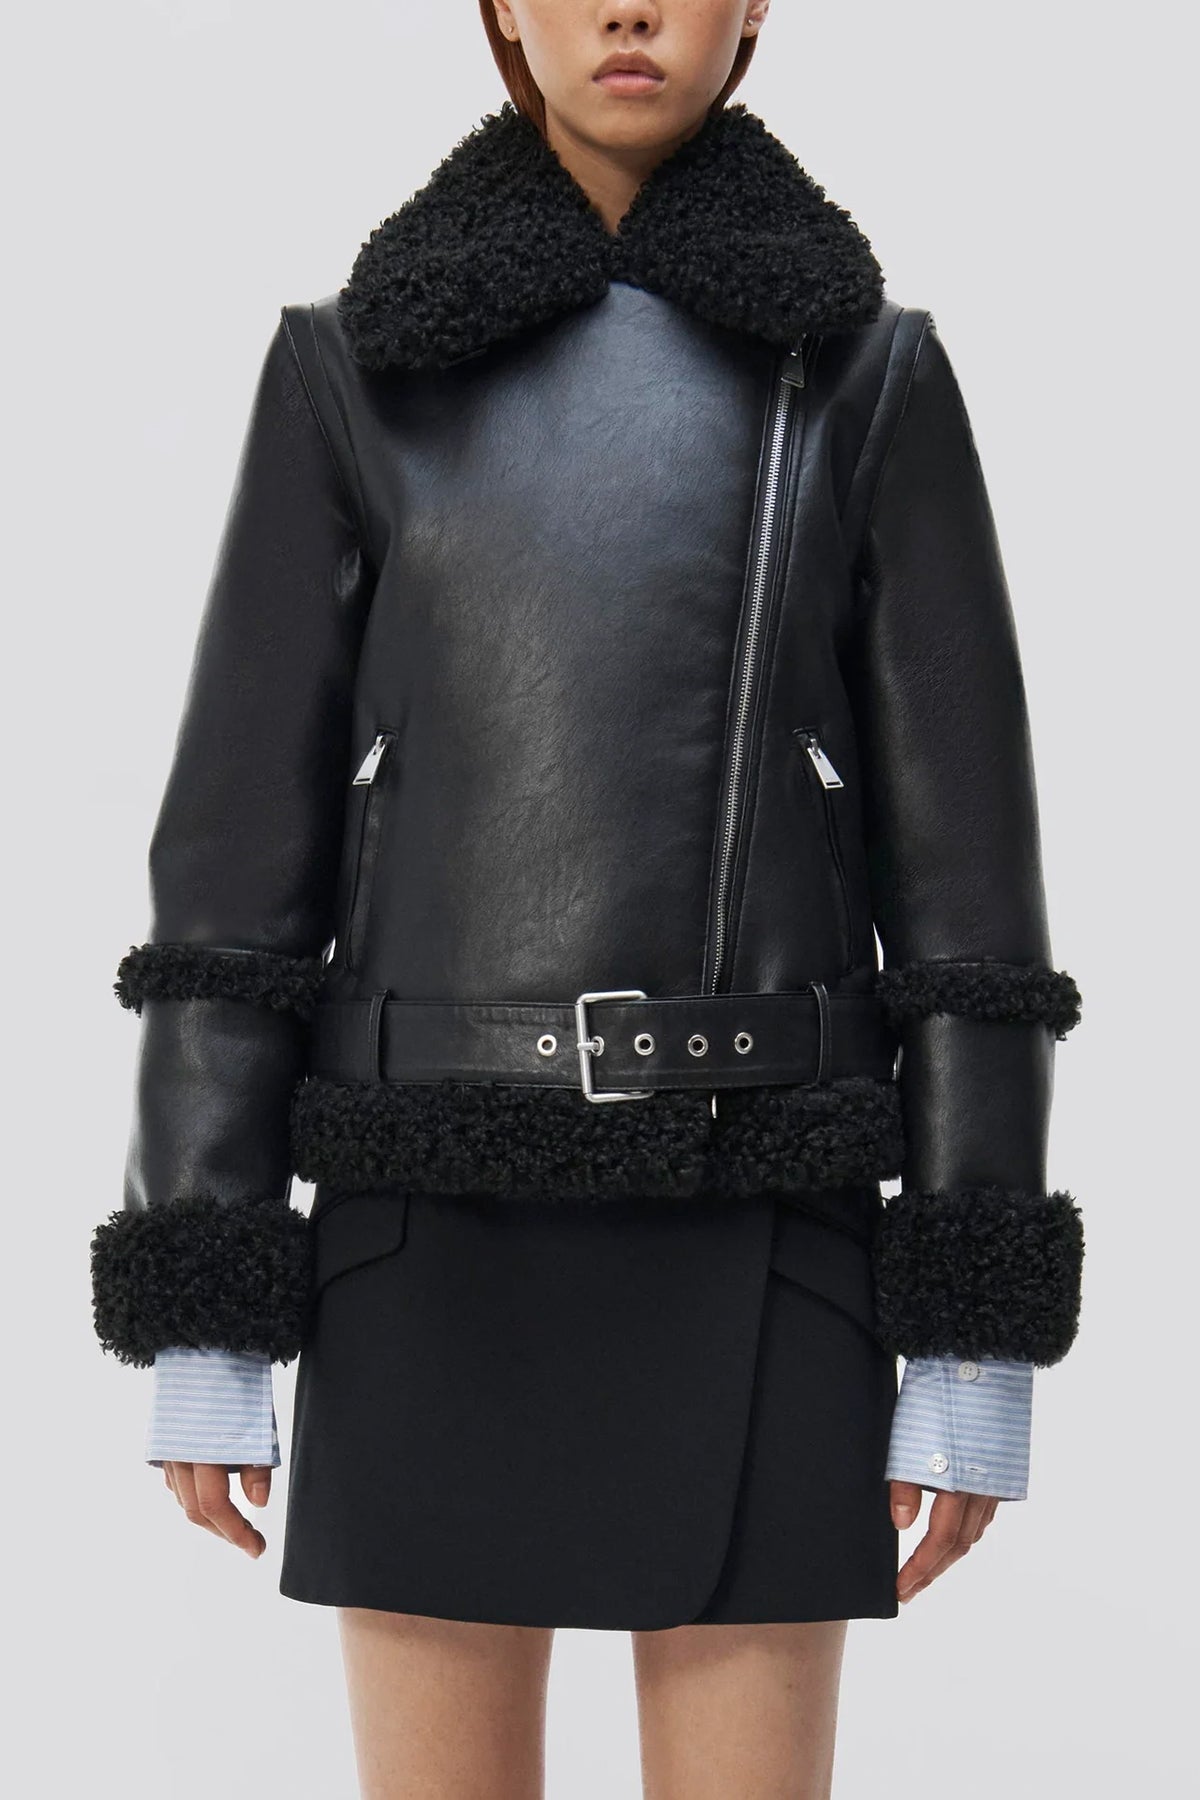 Charleston Sherpa Jacket with Removable Sleeves in Black - shop-olivia.com